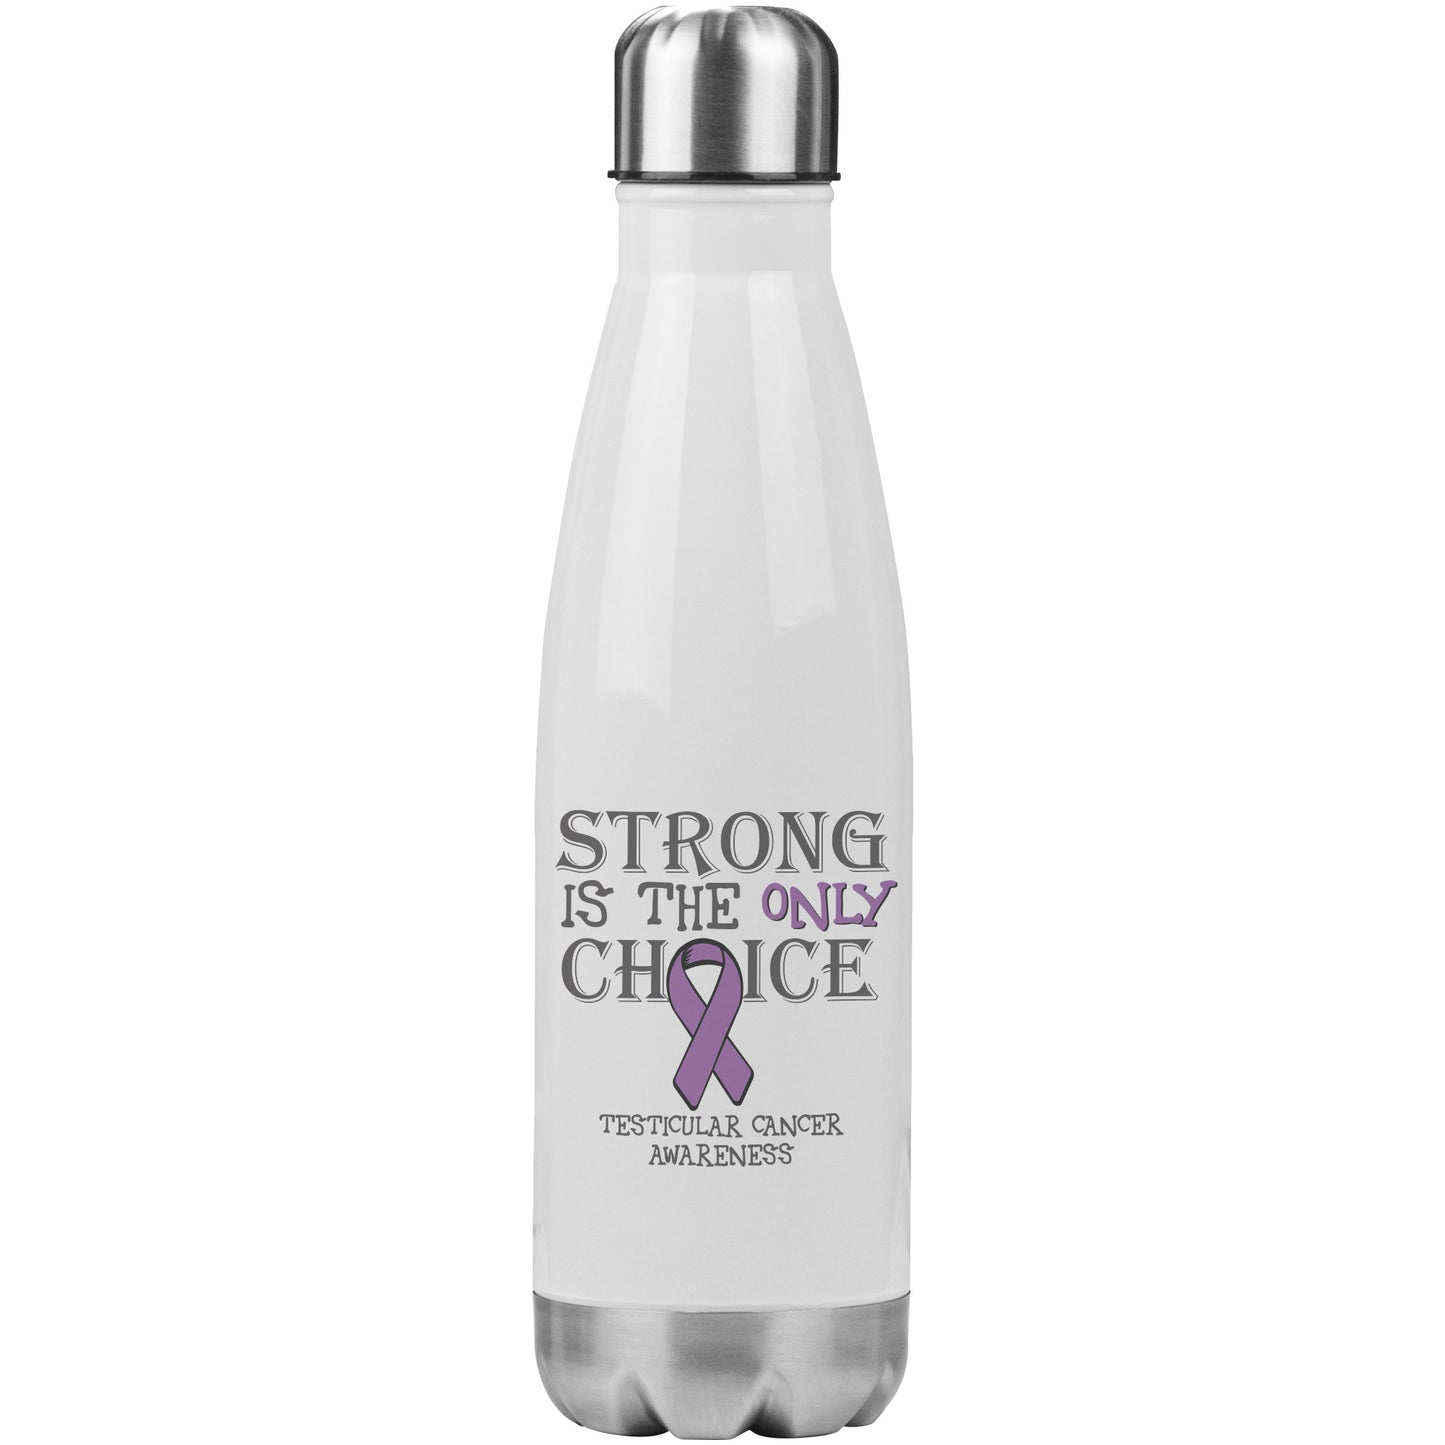 Strong is the Only Choice -Testicular Cancer Awareness 20oz Insulated Water Bottle